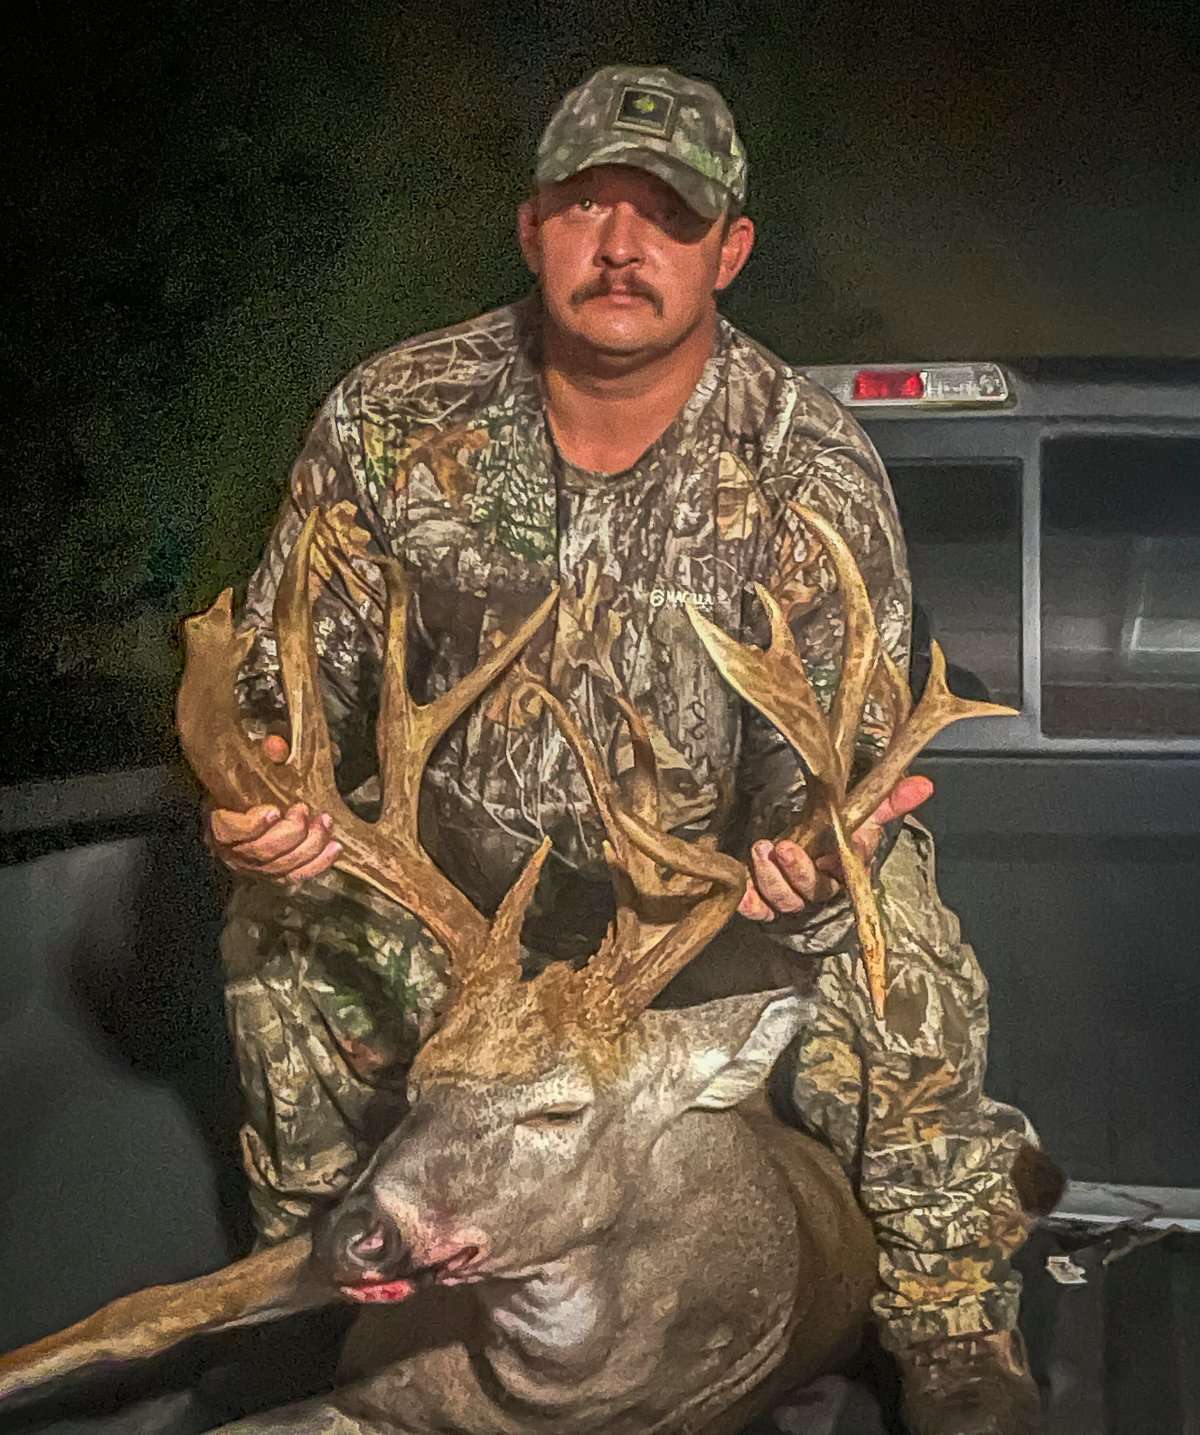 Ricky's buck had 18 scorable points and came in at just over 213